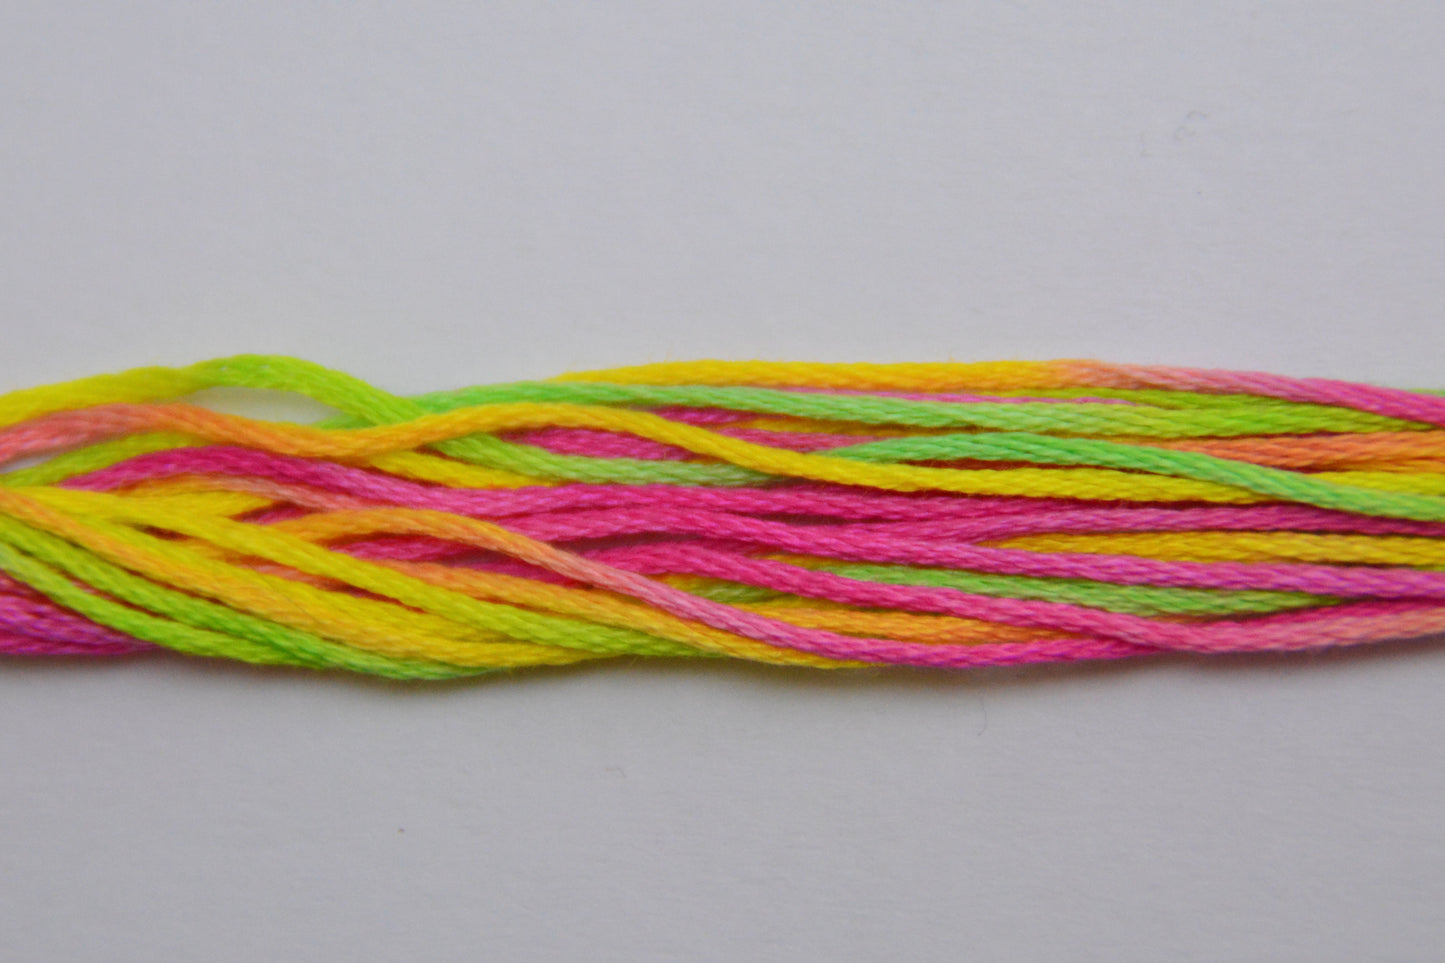 Calypso 4143 Weeks Dye Works 6-Strand Hand-Dyed Embroidery Floss